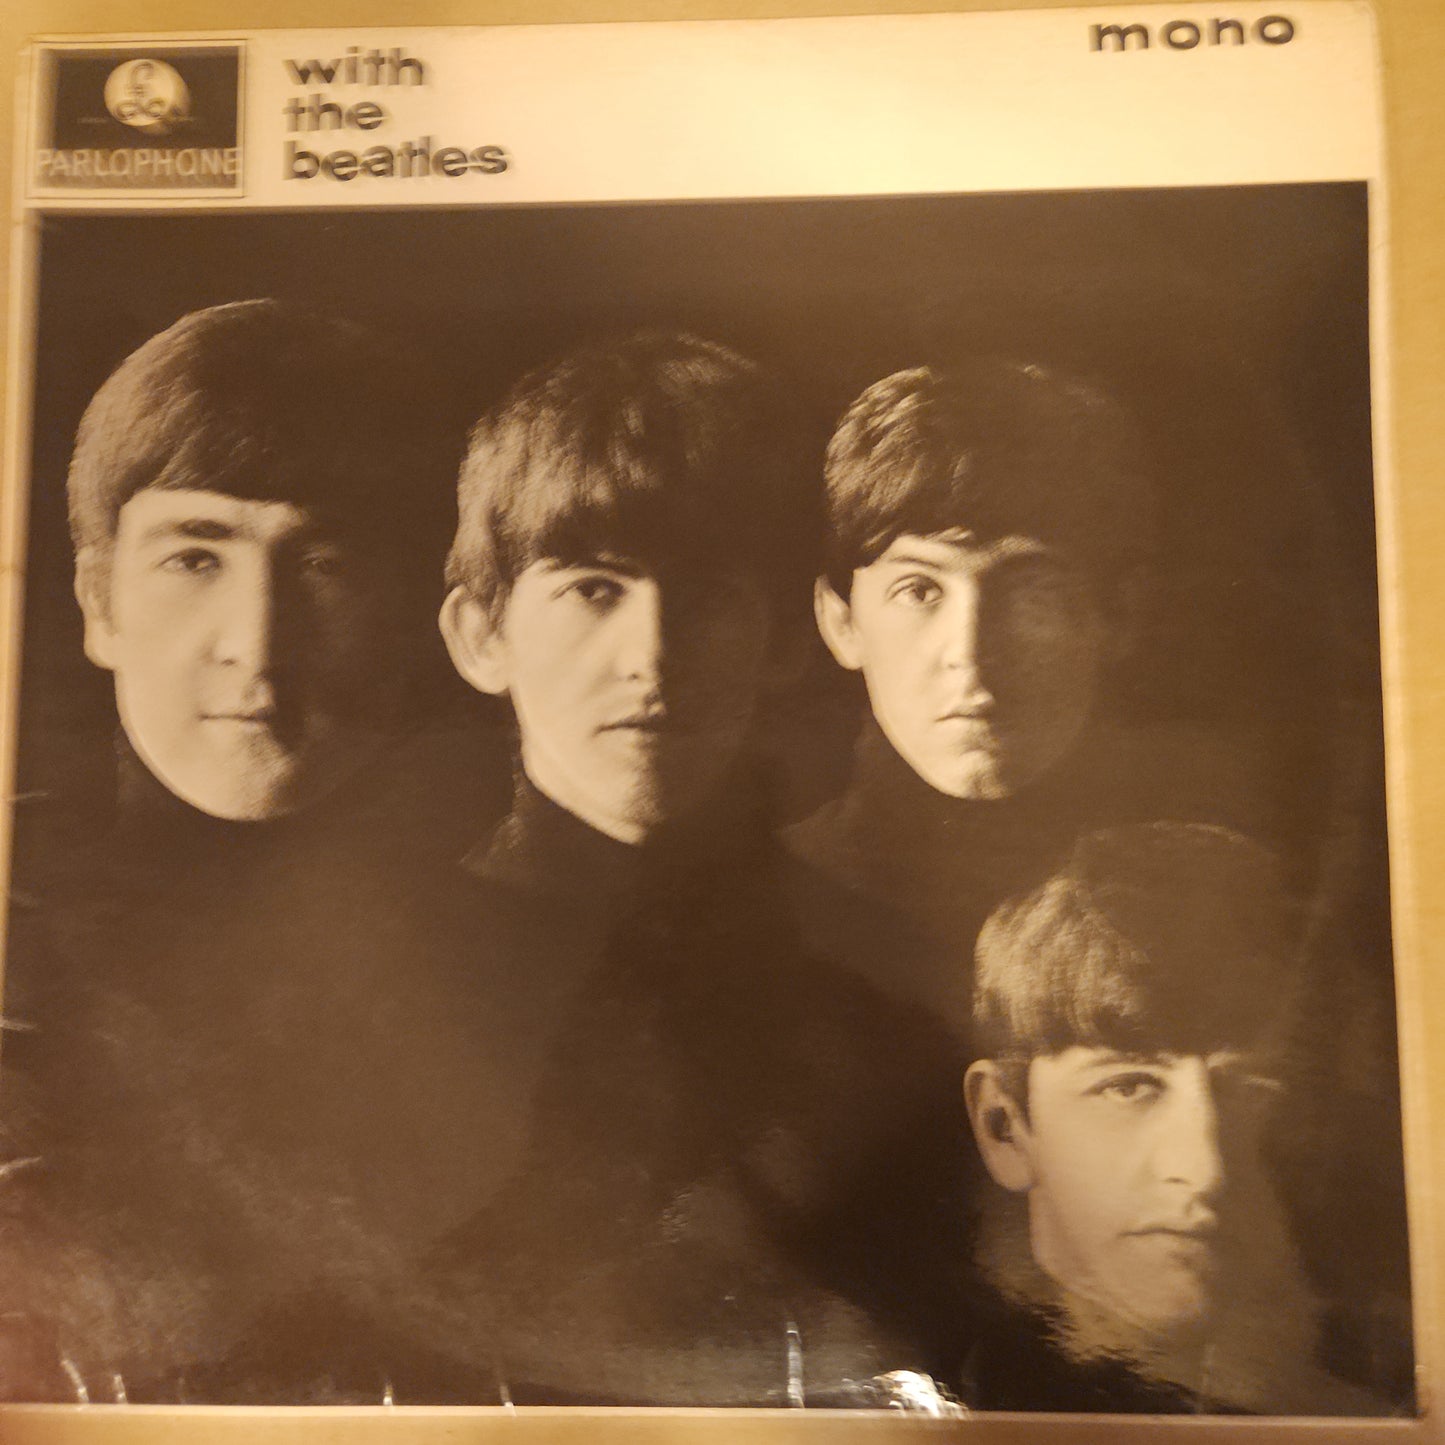 The Beatles - With The Beatles  (990)